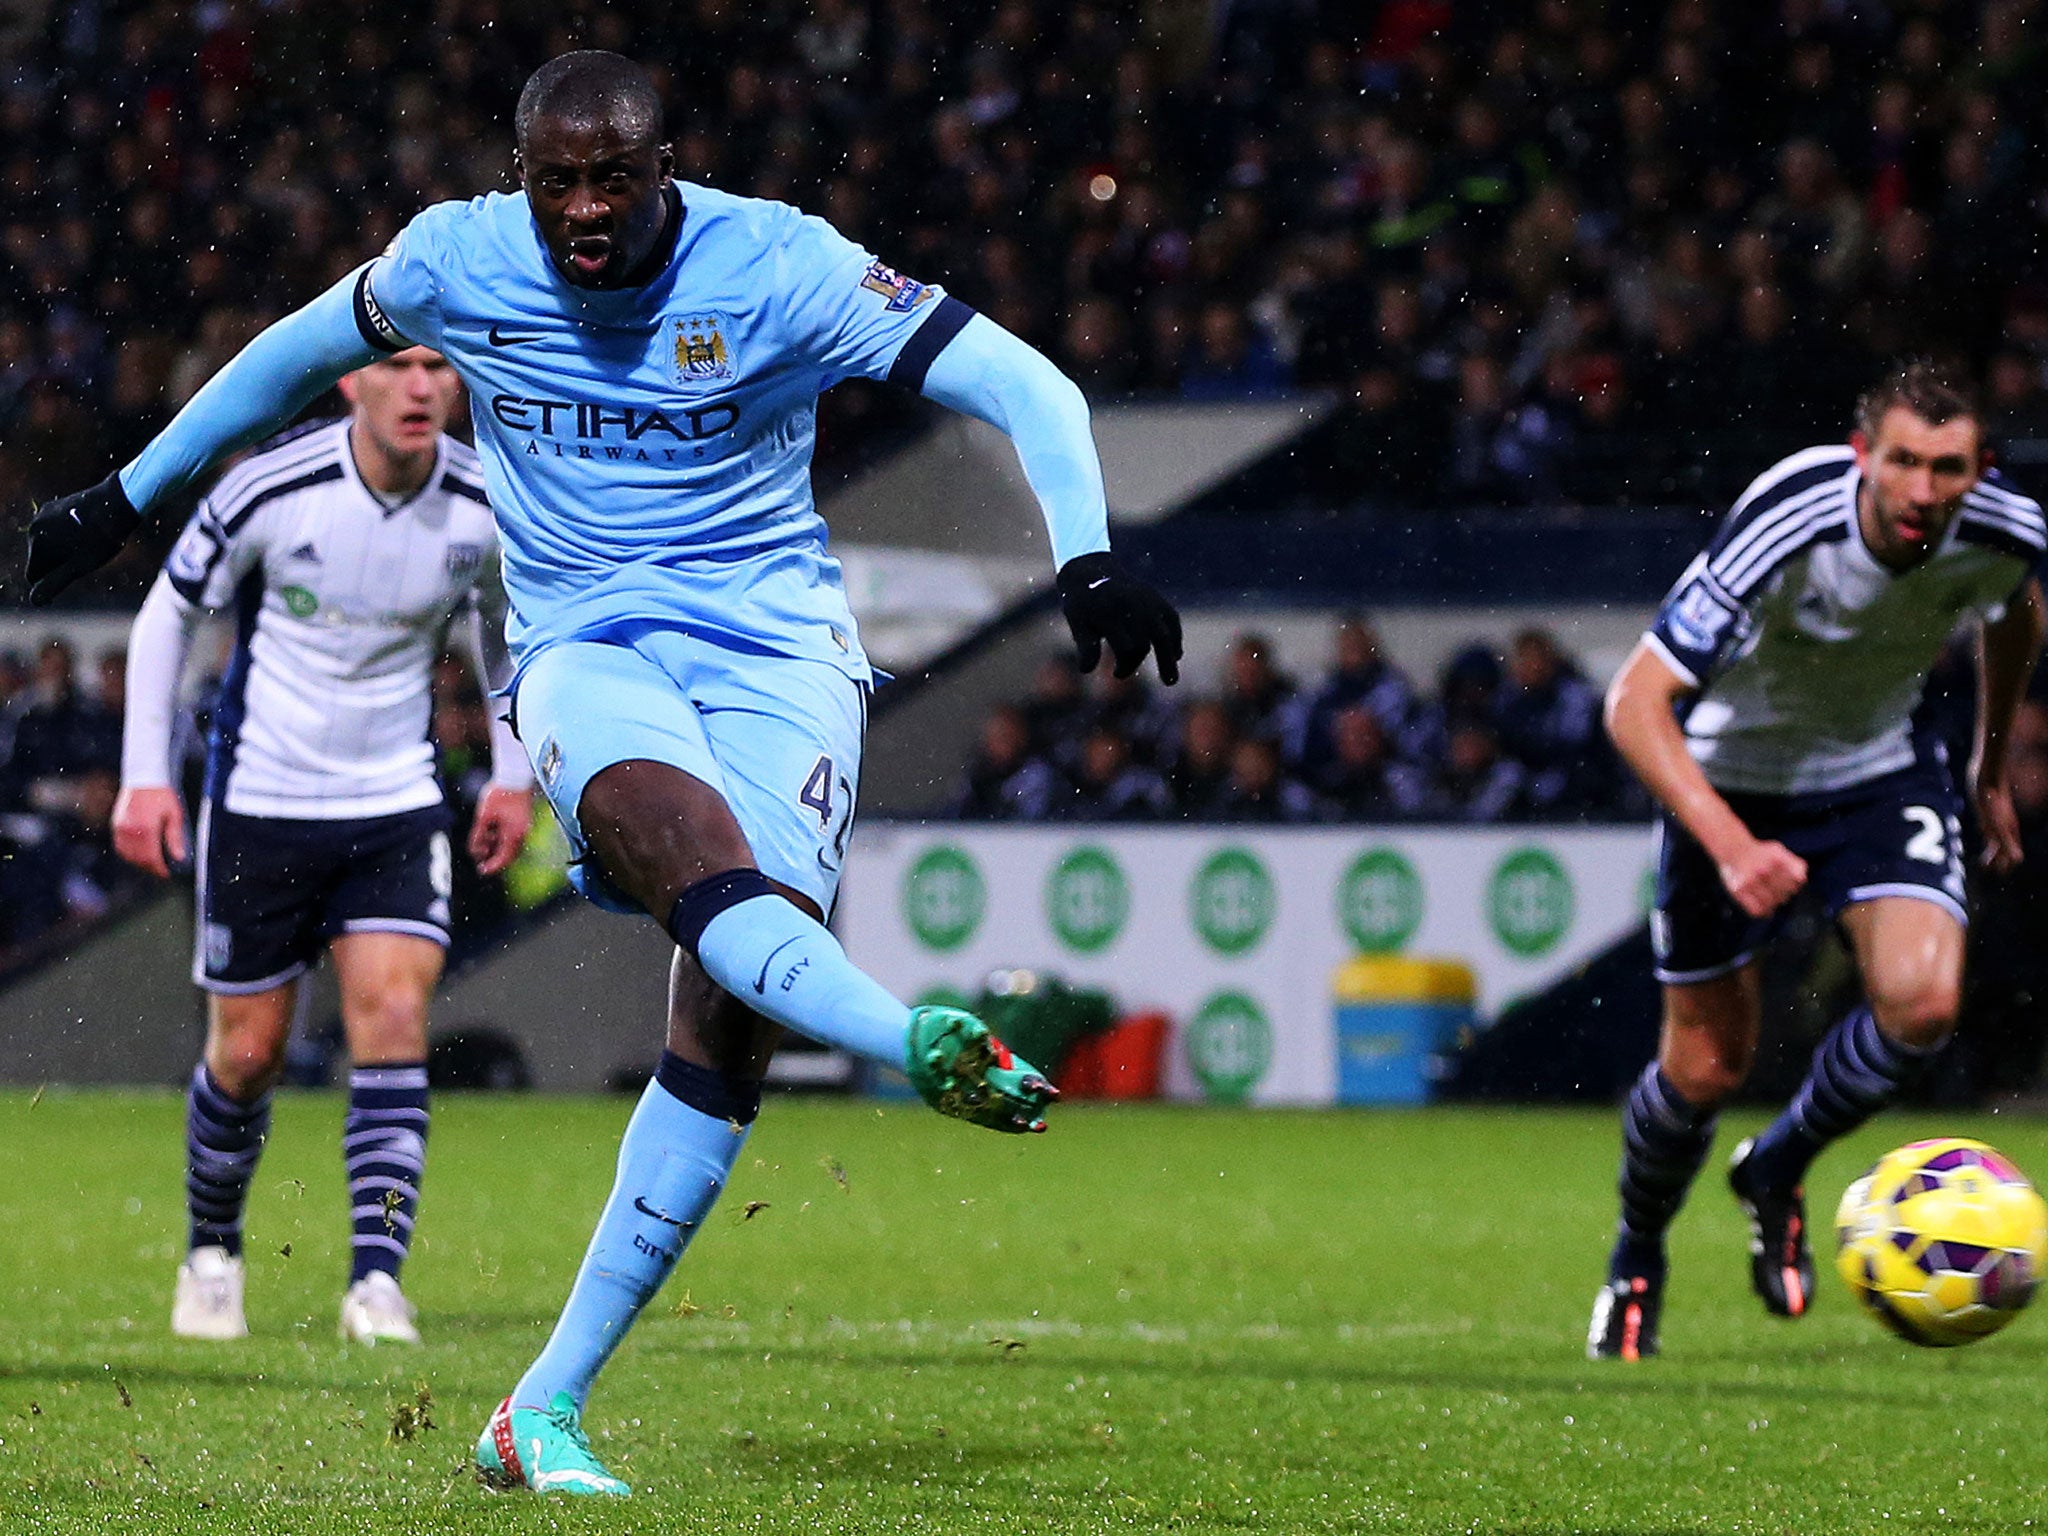 Yaya Toure converts a first-half penalty to double City's lead